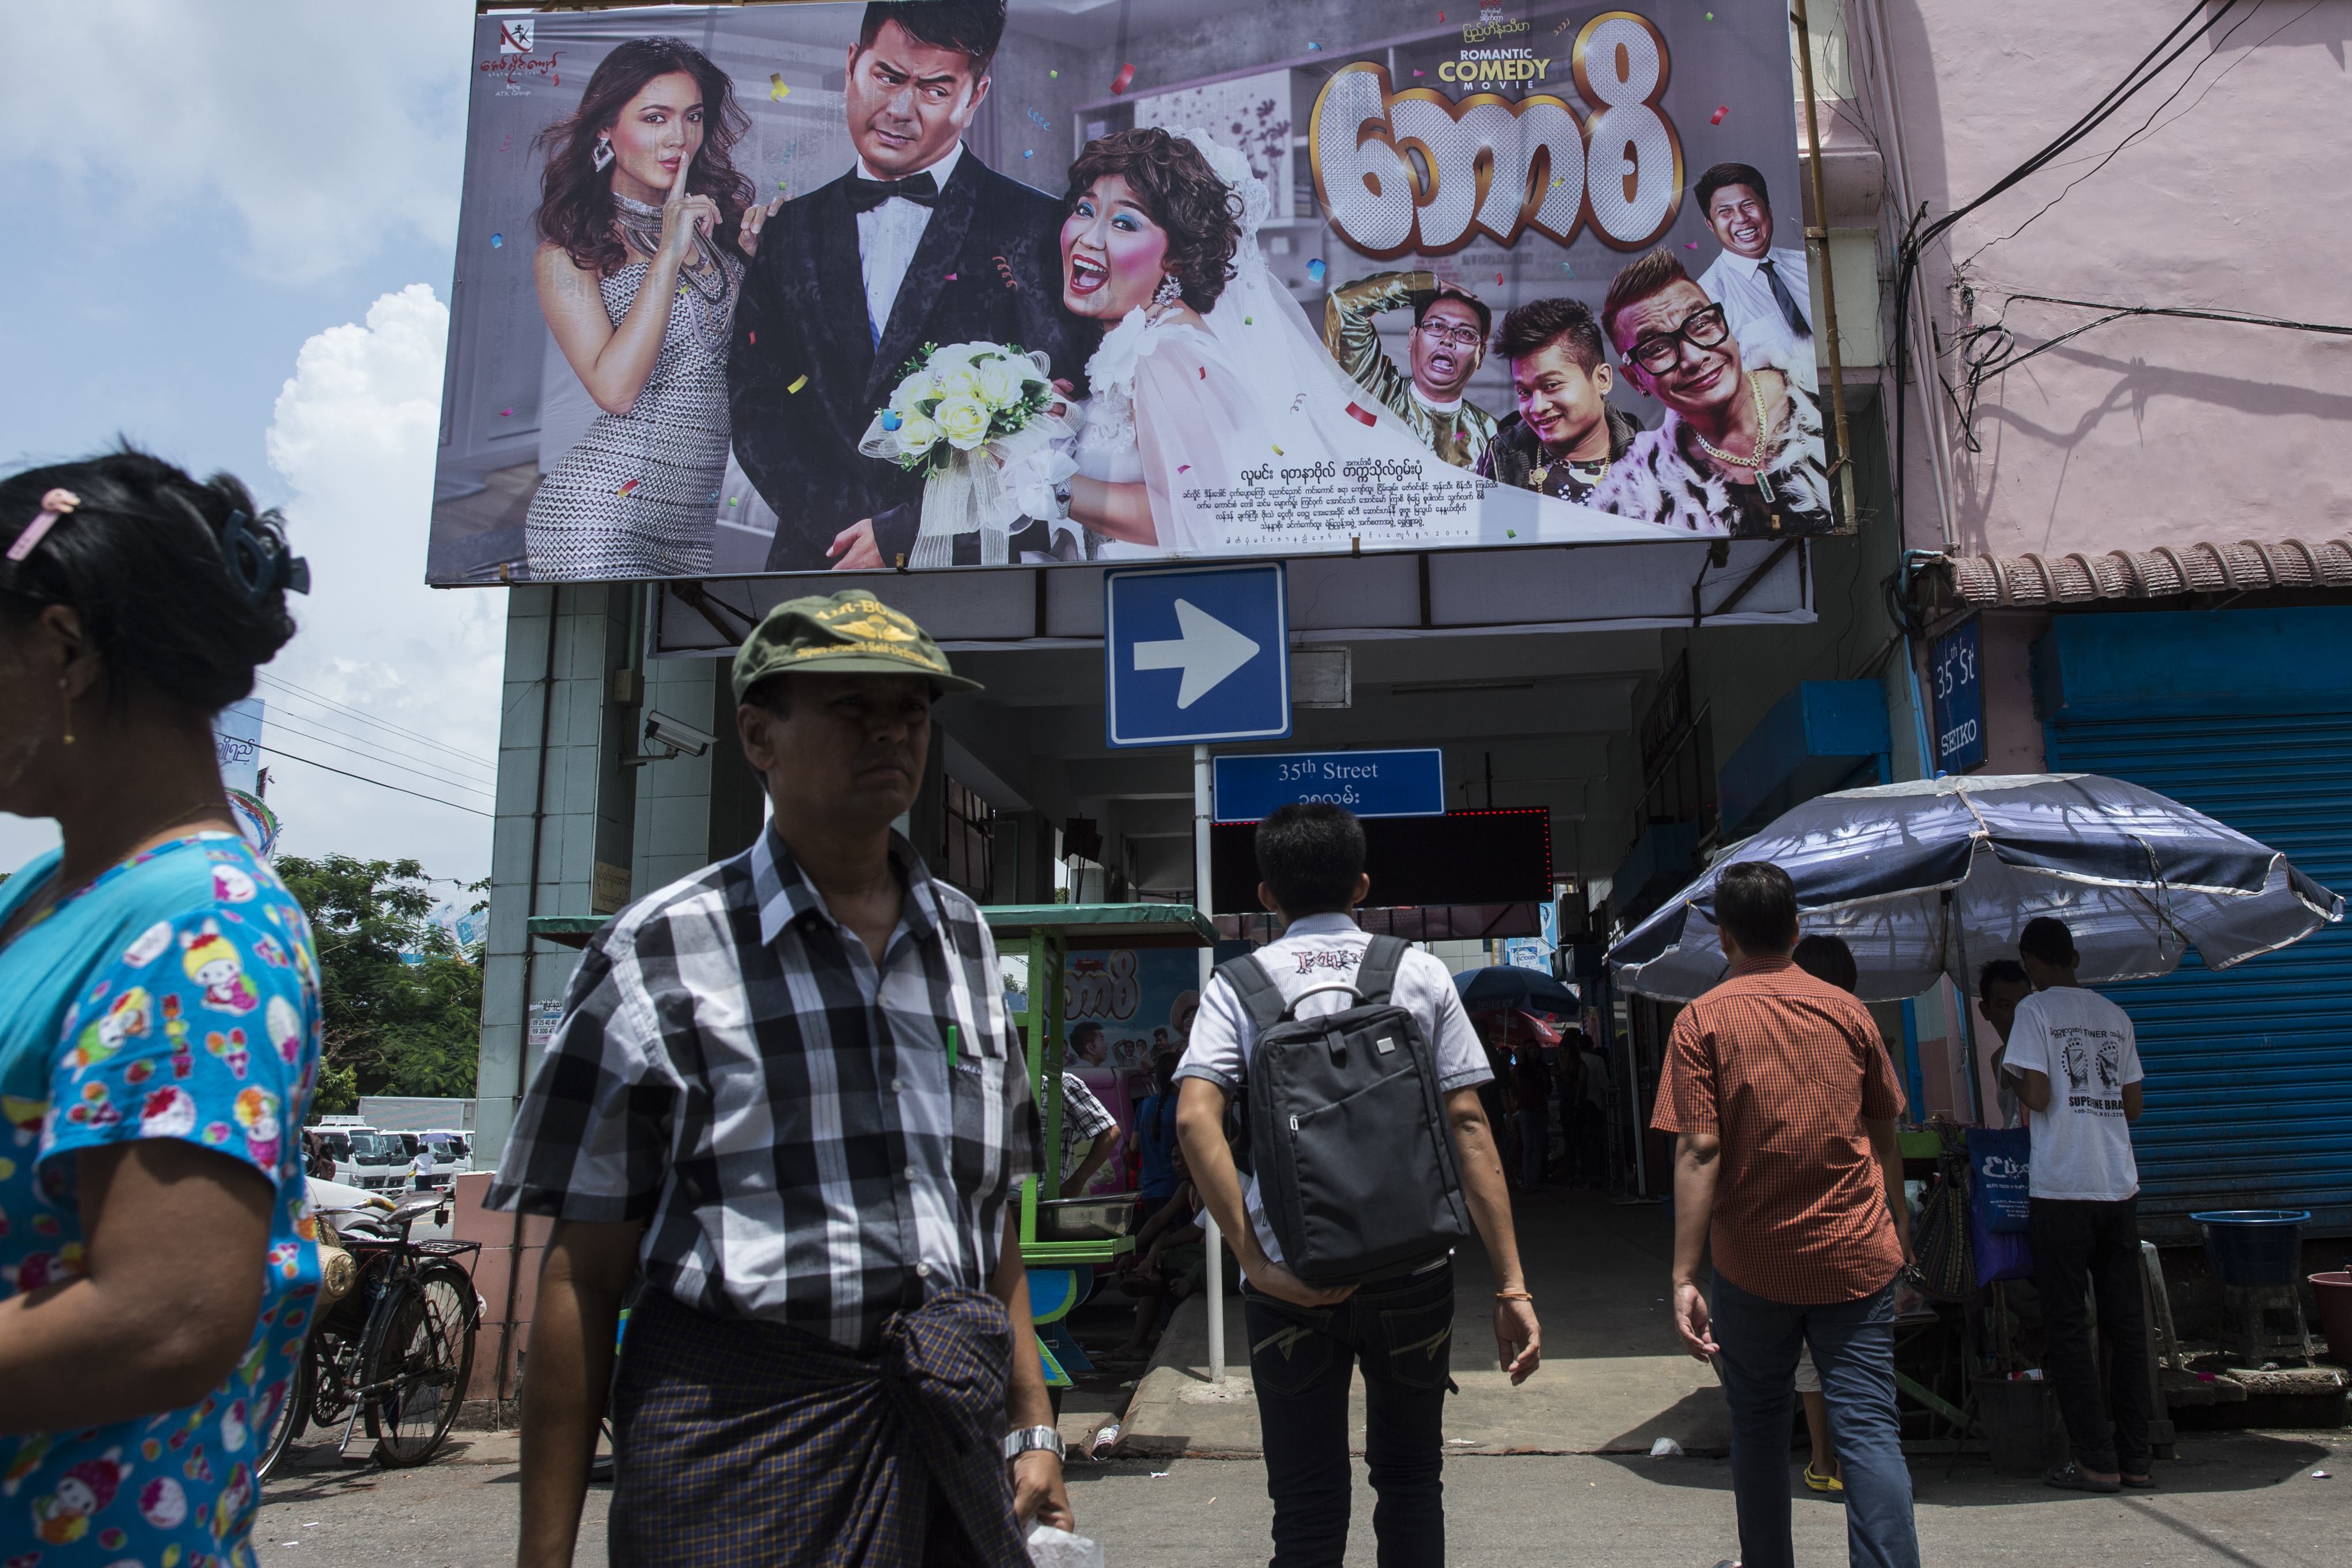 This picture taken on August 22, 2016, shows people walking by the Thwin cinema in downtown area of Yangon. (YE AUNG THU—AFP/Getty Images)